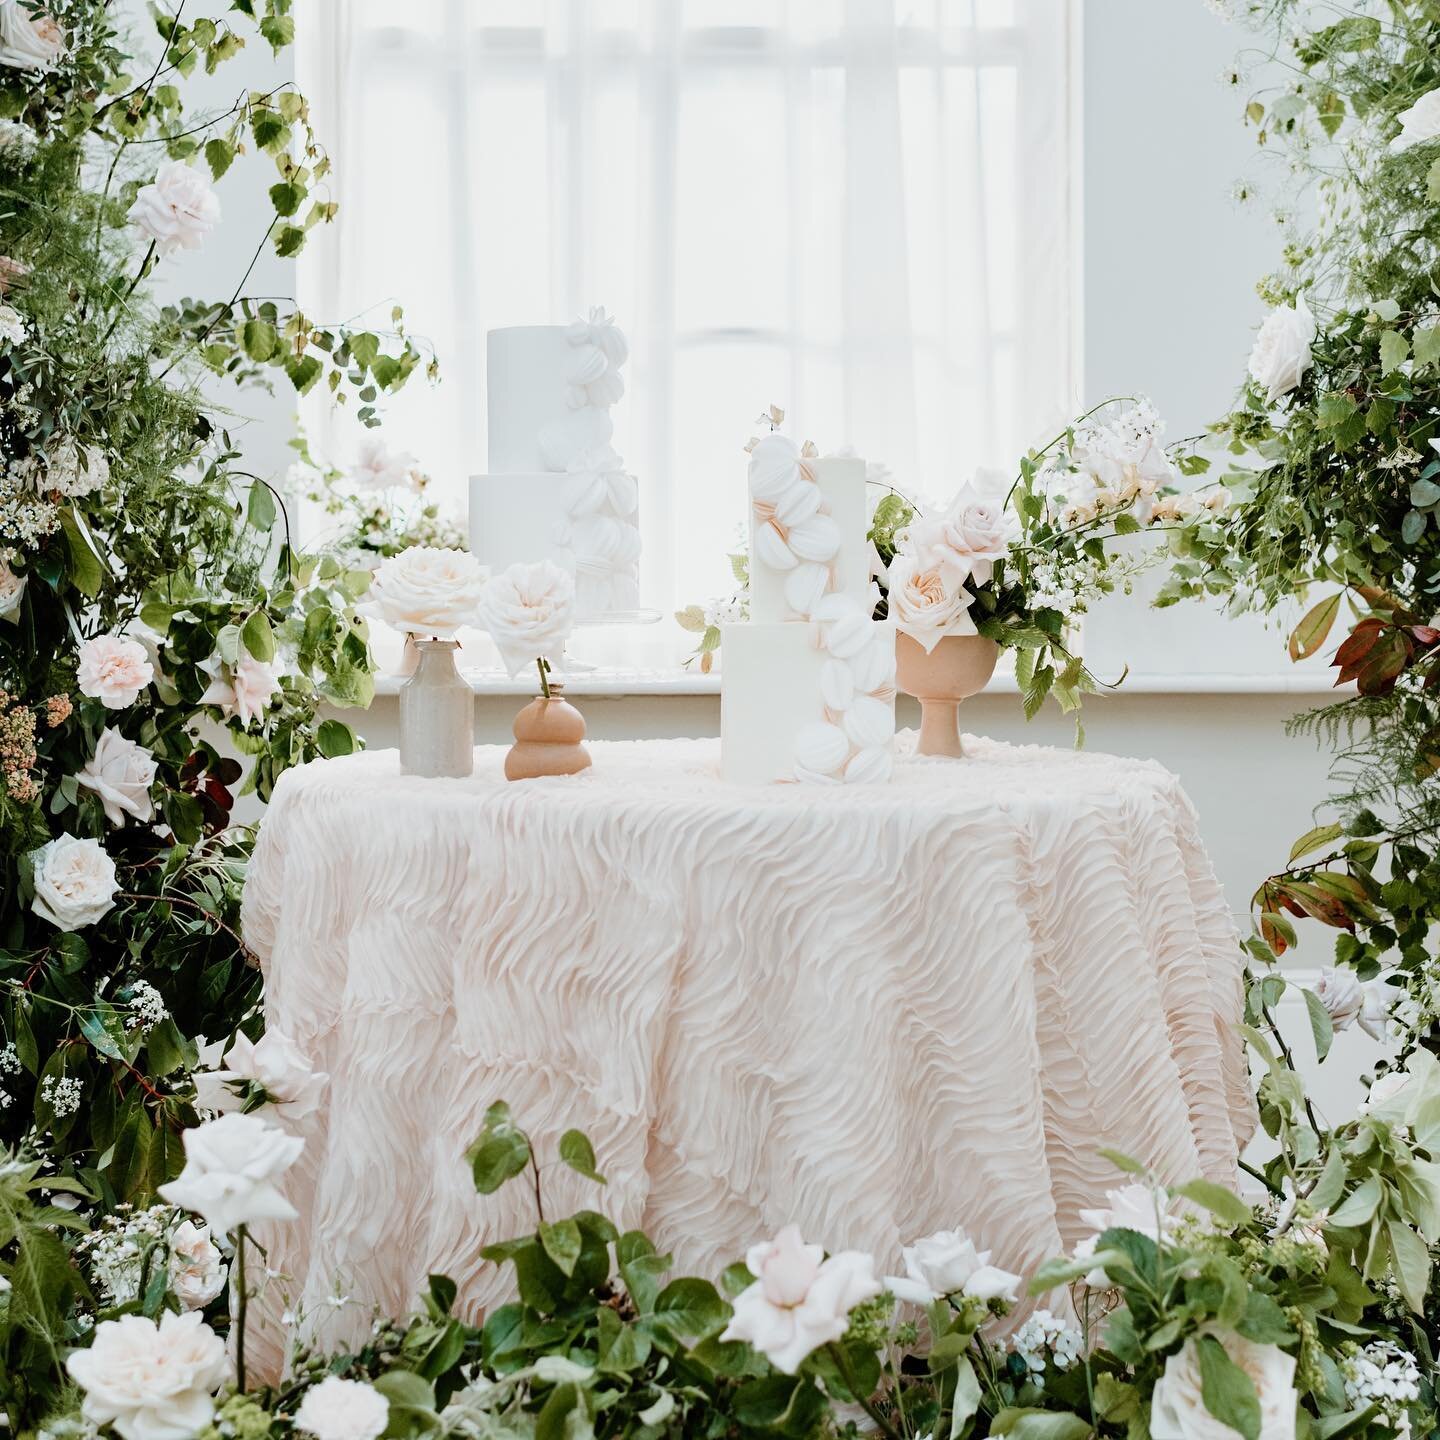 CAKE BABY 🤍

How dreamy is this!! For all you cake lovers can we do more of this please 🤍

Venue: @saltmarshehall 
Photography: @lucydennisphotography 
Hire, Styling &amp; Concept: @bellebijoux_events 
Floral collaboration: @ivylanefloristhull &amp